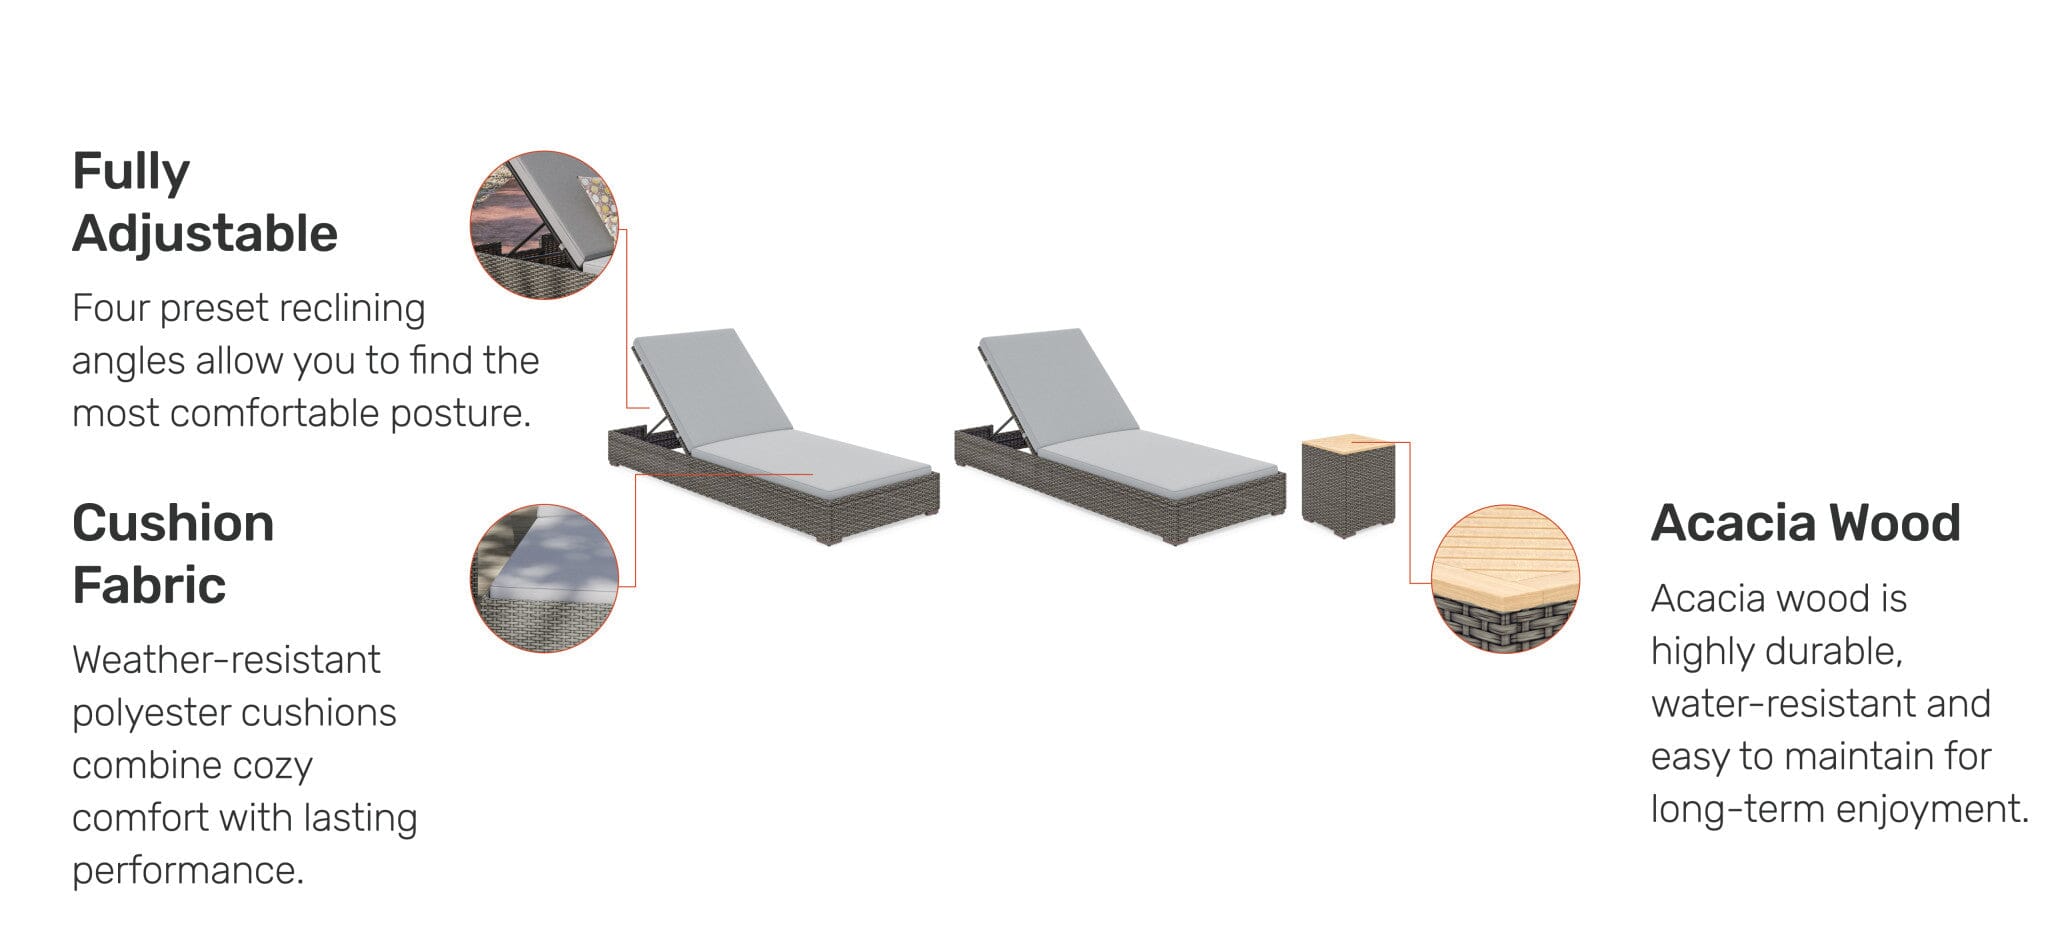 Modern & Contemporary Outdoor Chaise Lounge Pair and Side Table By Boca Raton Outdoor Seating Boca Raton